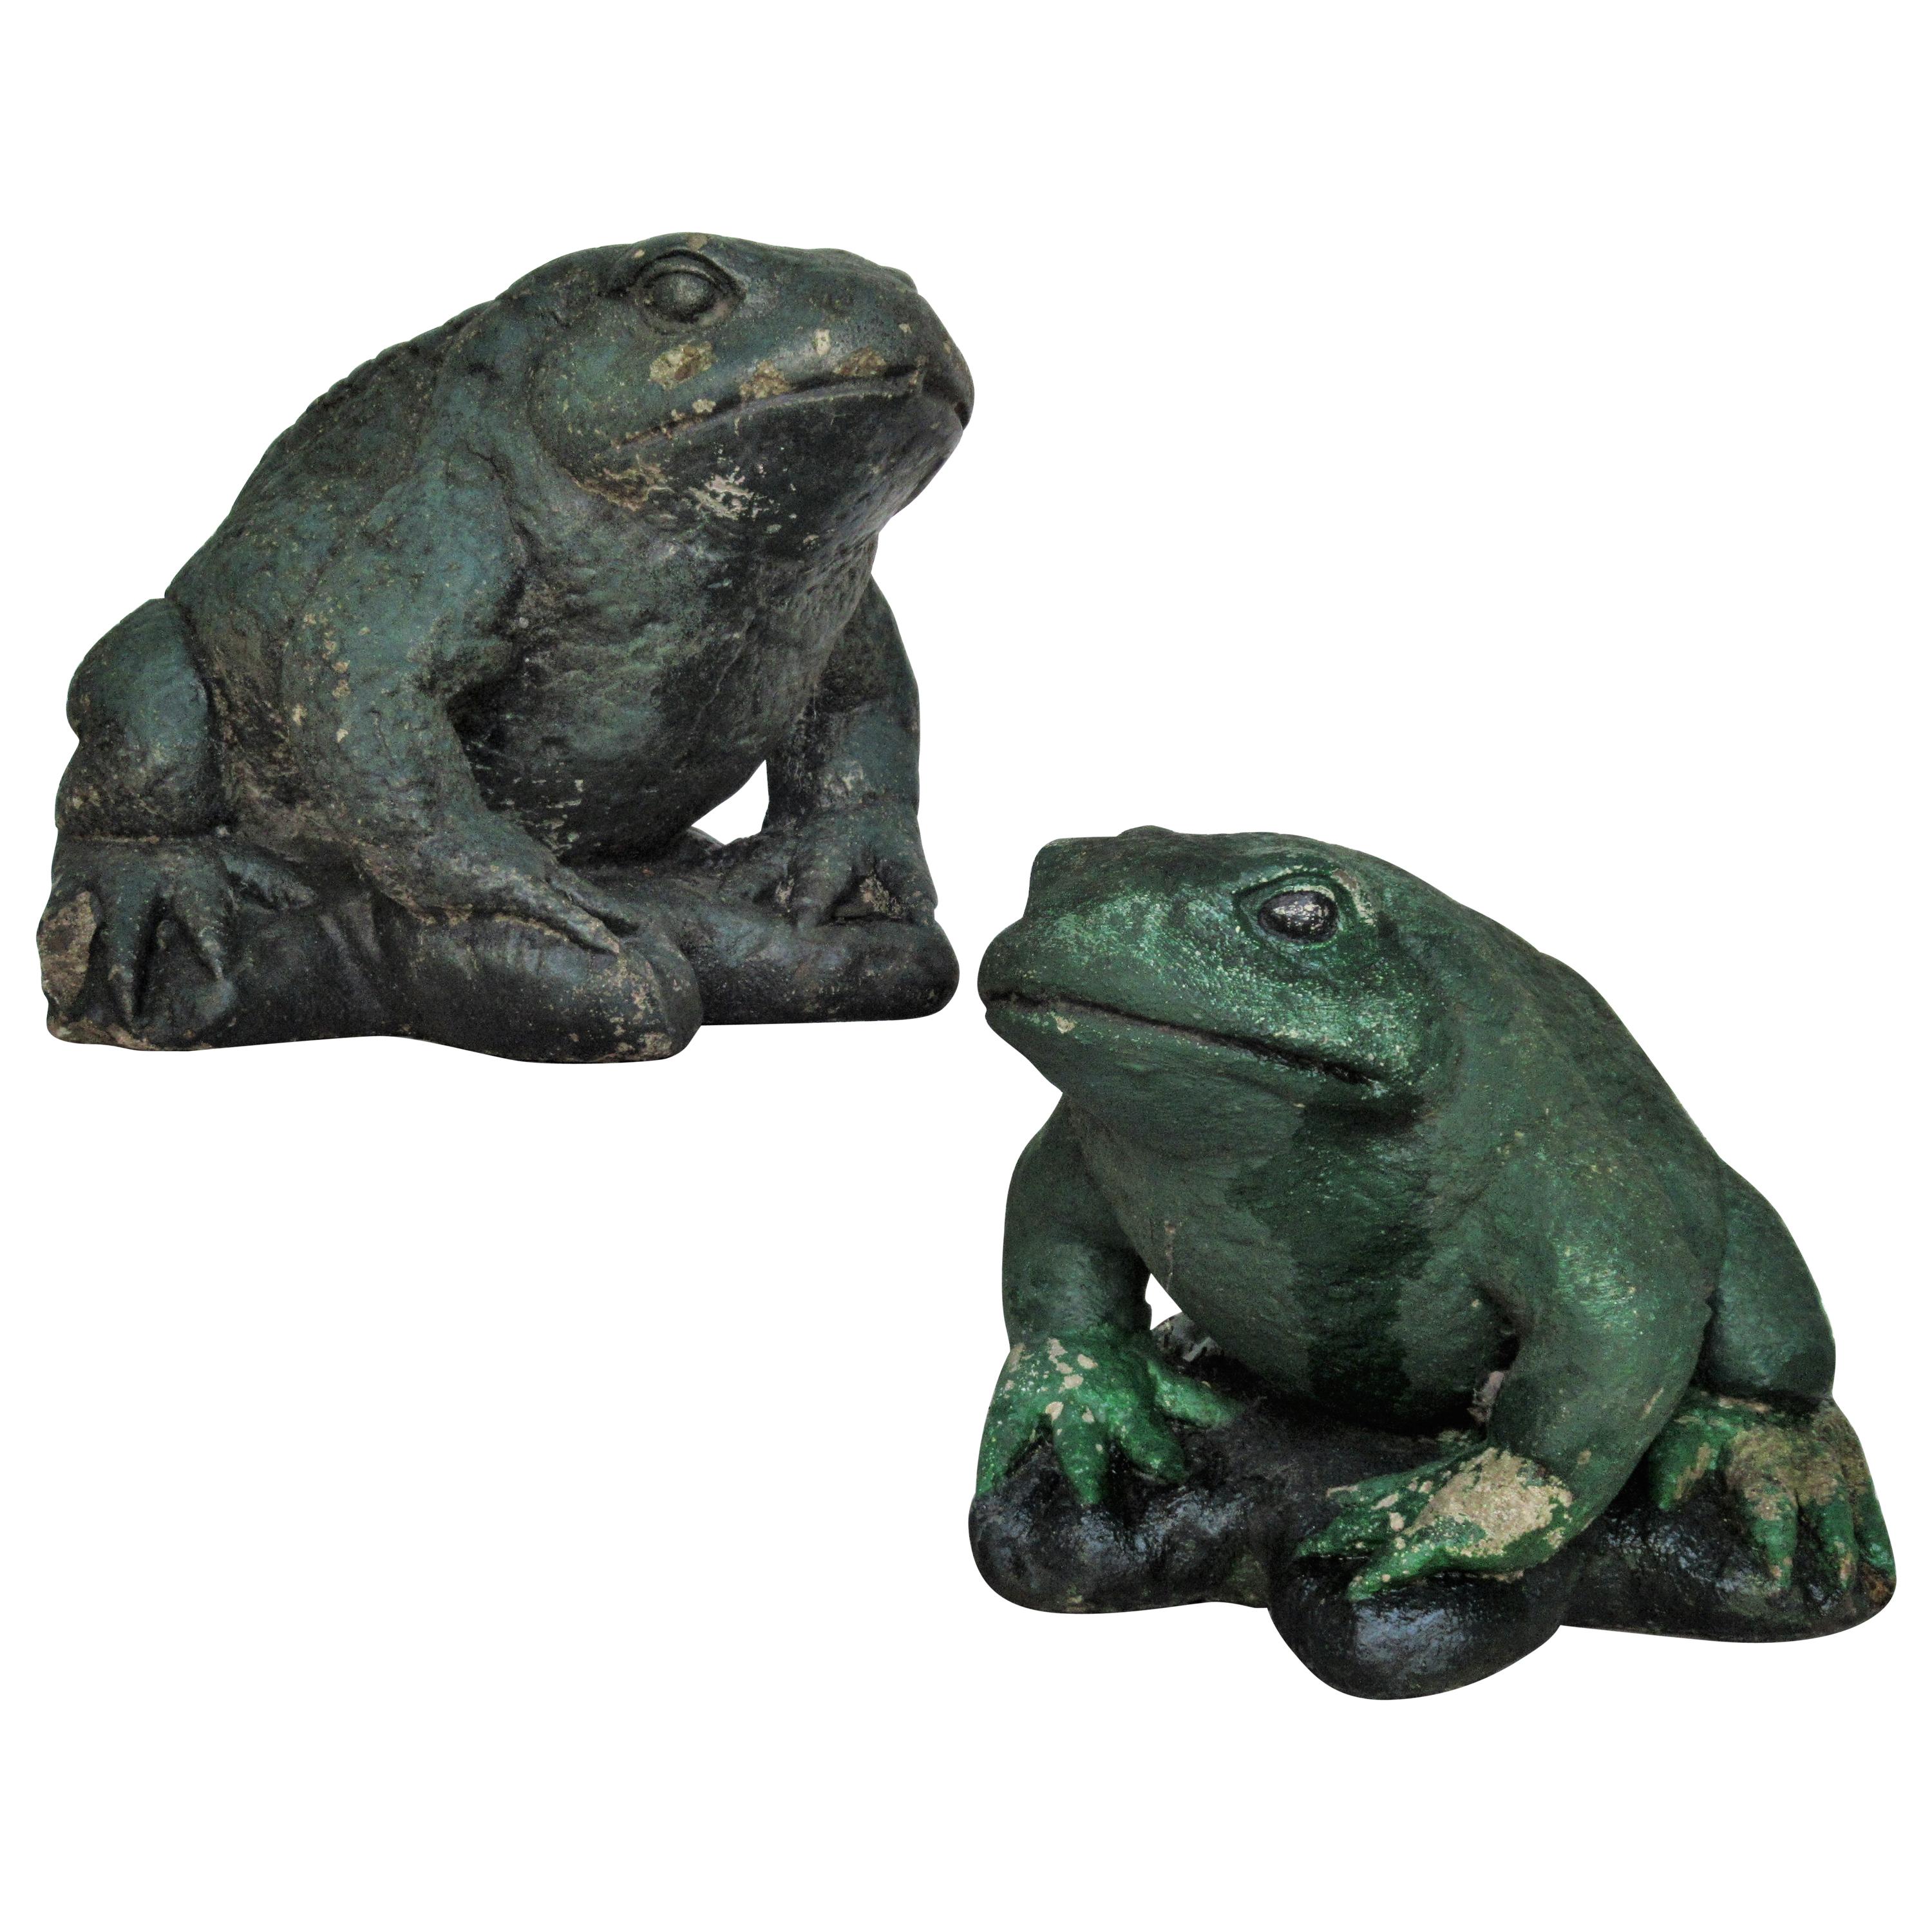  Old Painted Stone Garden Toads